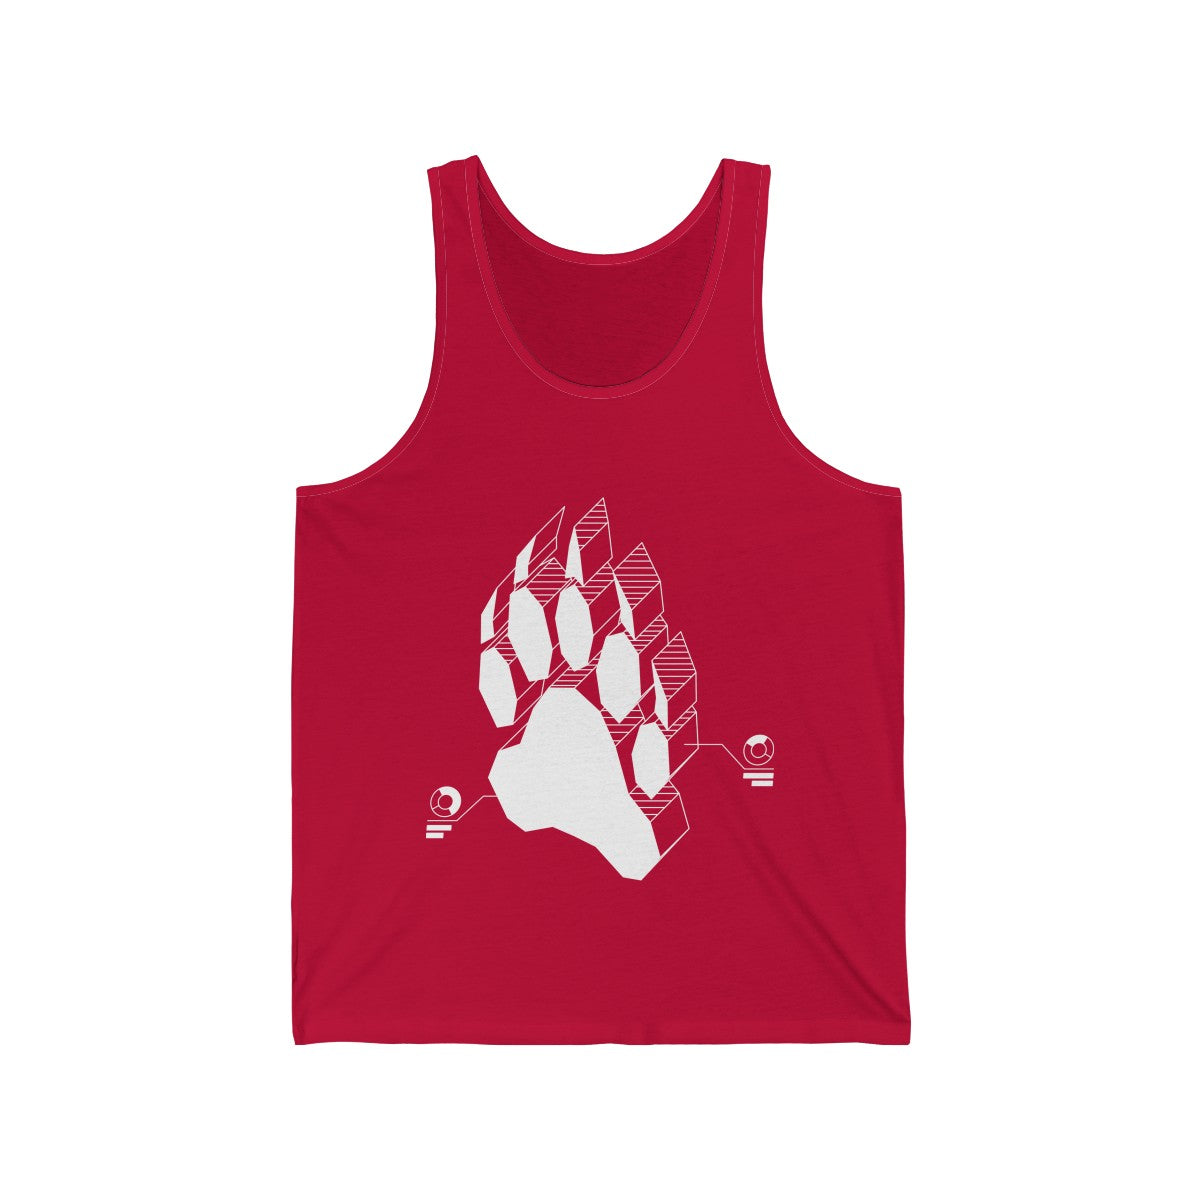 Techno Canine - Tank Top Tank Top Wexon Red XS 